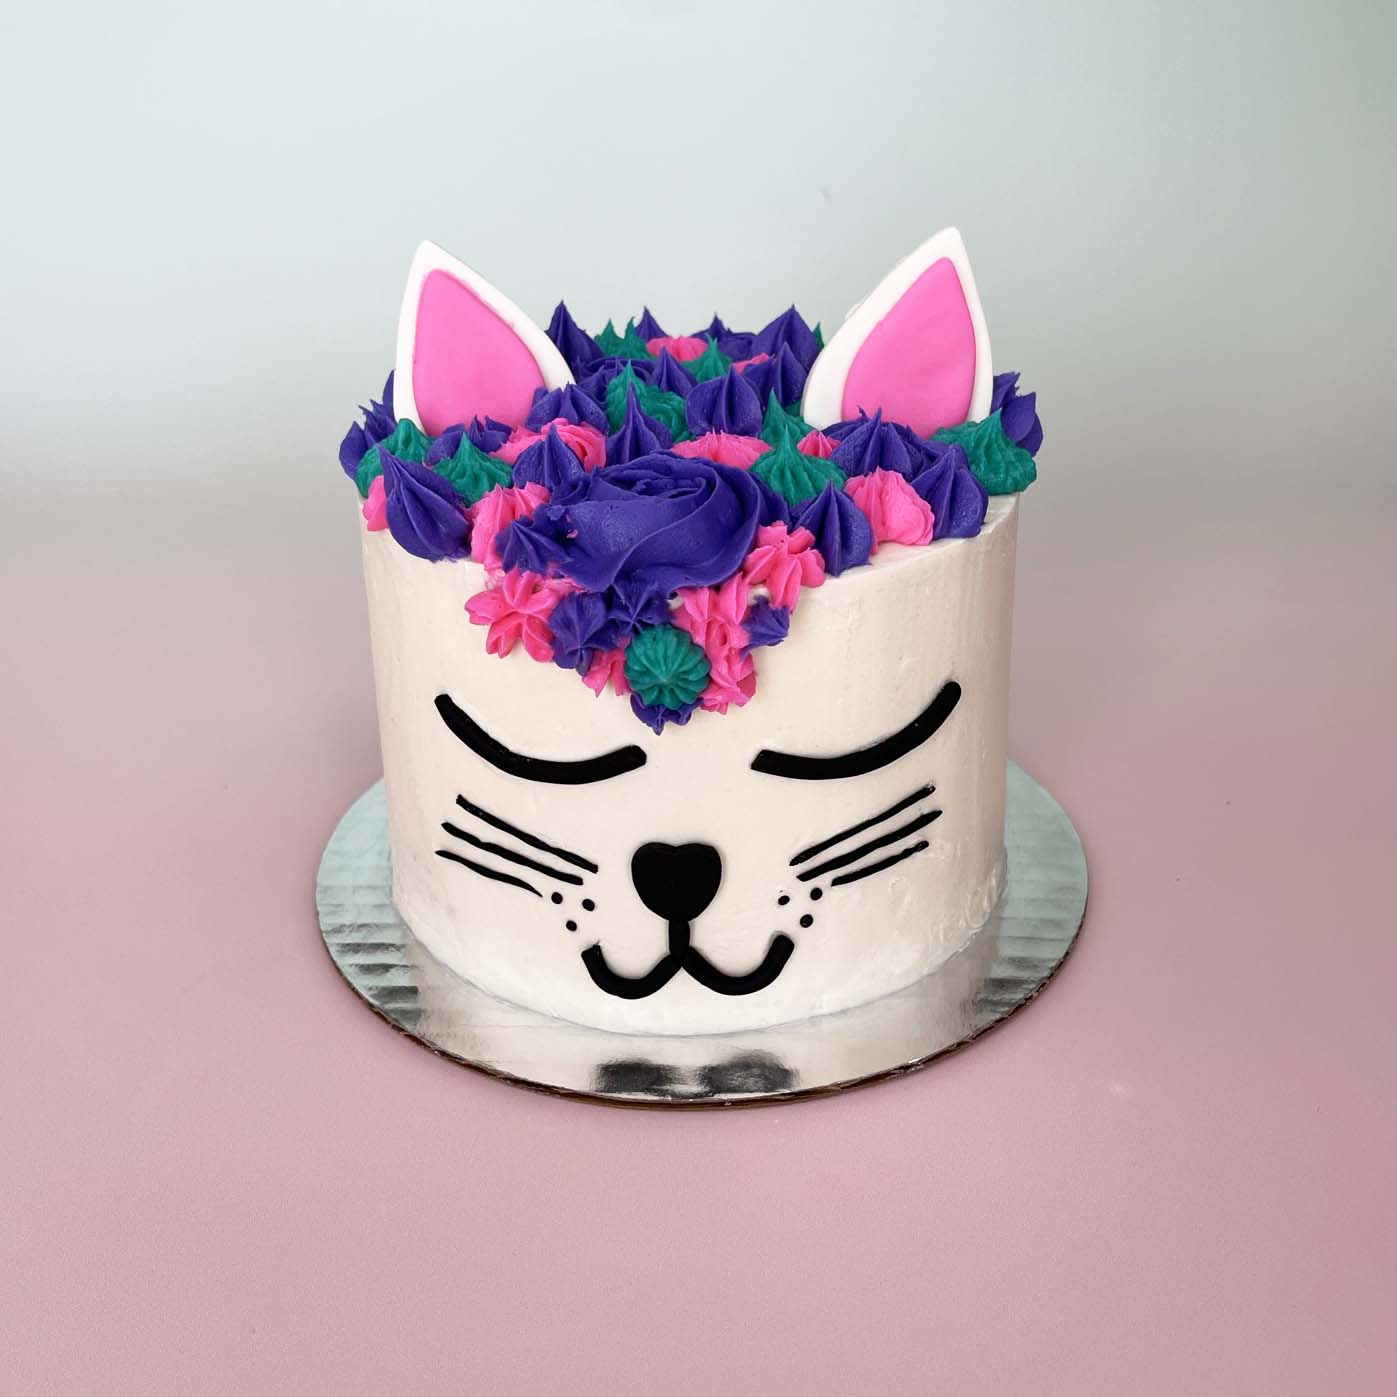 A white cake with a cute cat face decorated in black fondant. The eyes are closed, giving the cat a rested, contented look. The top of the cake is covered in purple, pink, and teal frosting rosettes, stars, and swirls in different shapes and sizes. White fondant ears sit atop the cake and are lined with pink fondant. This fun cat cake is in the genre of unicorns, woodland animals, and other whimsical creatures. 